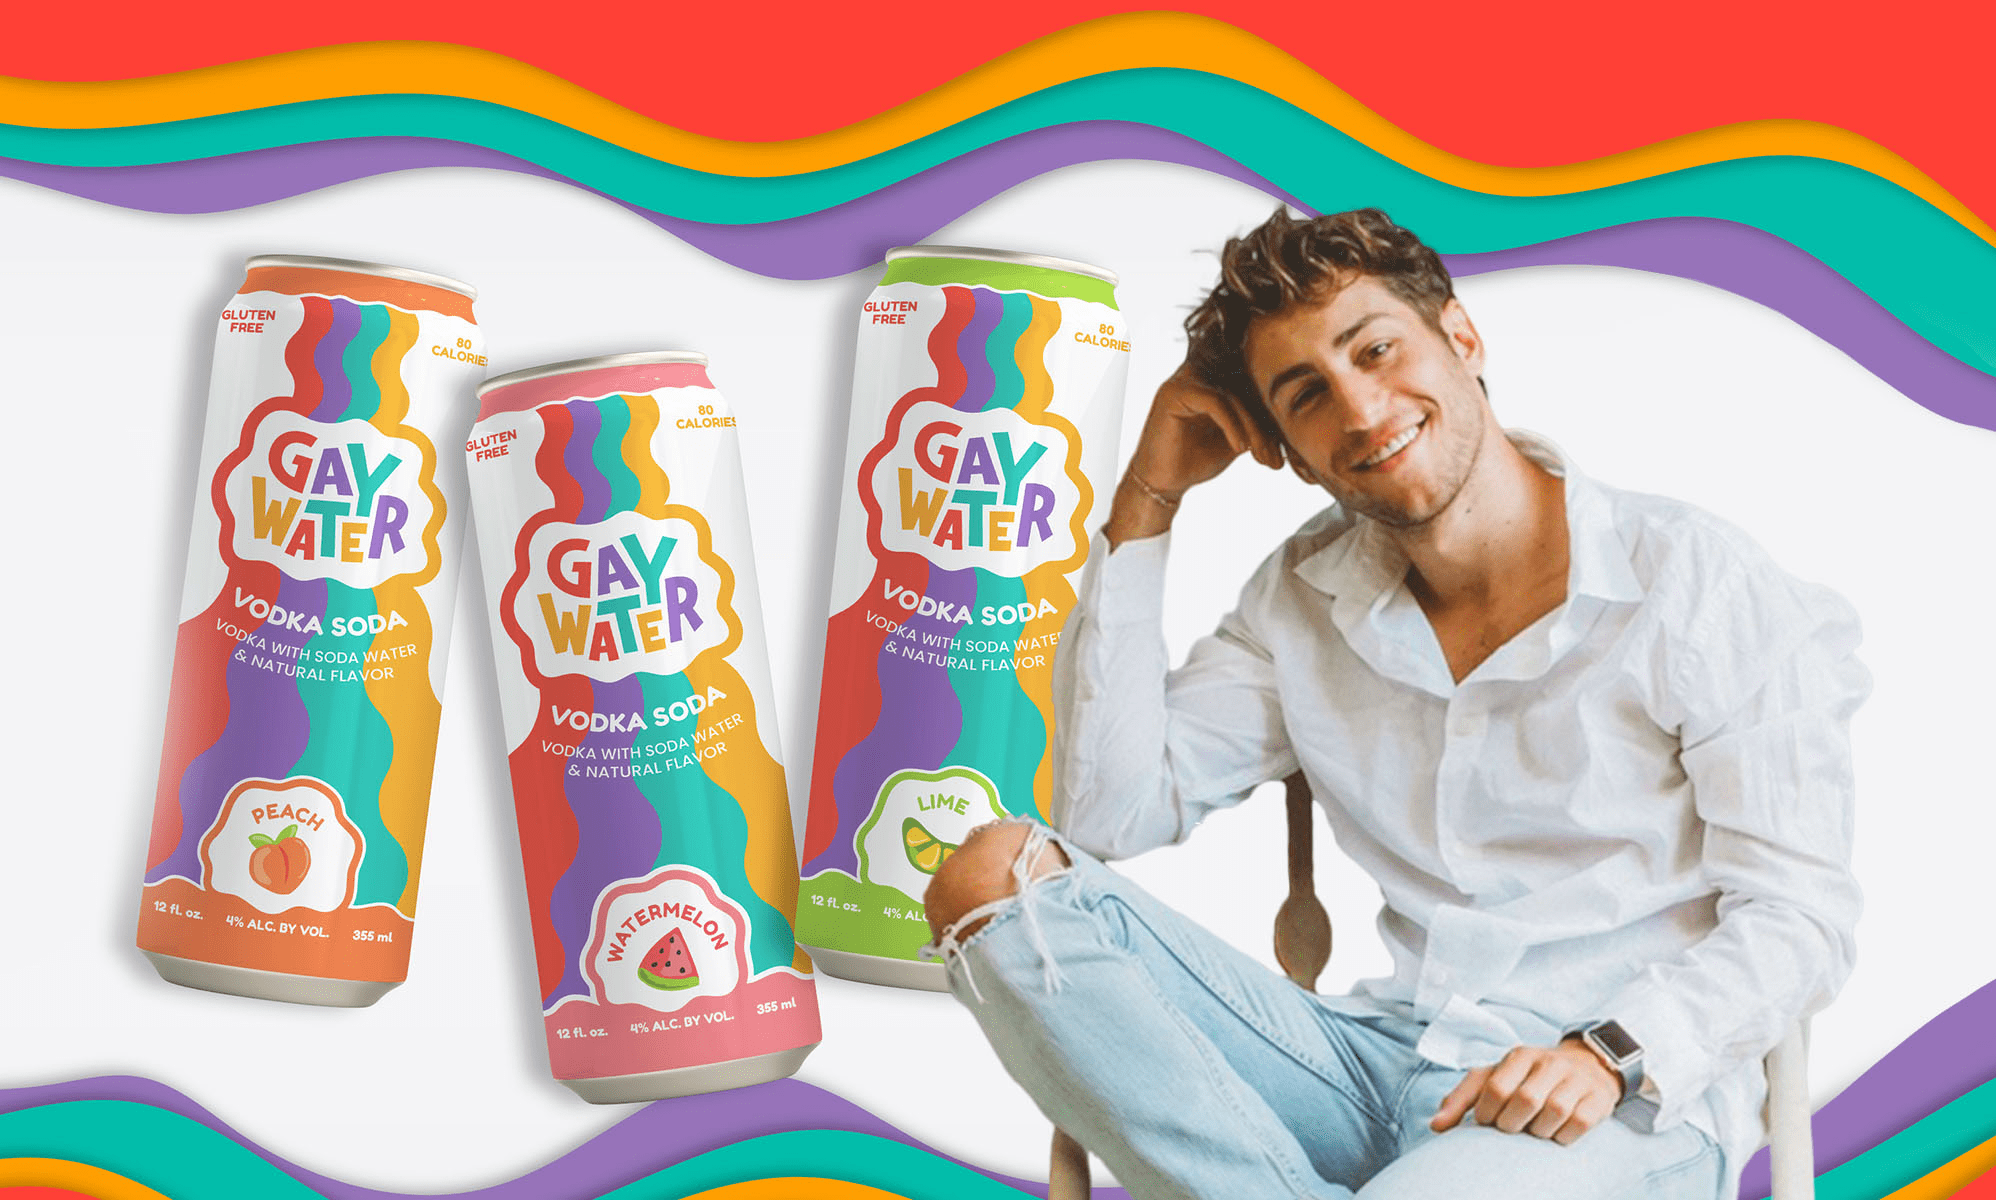 Founder Spencer Hoddeson and his company Gay Water